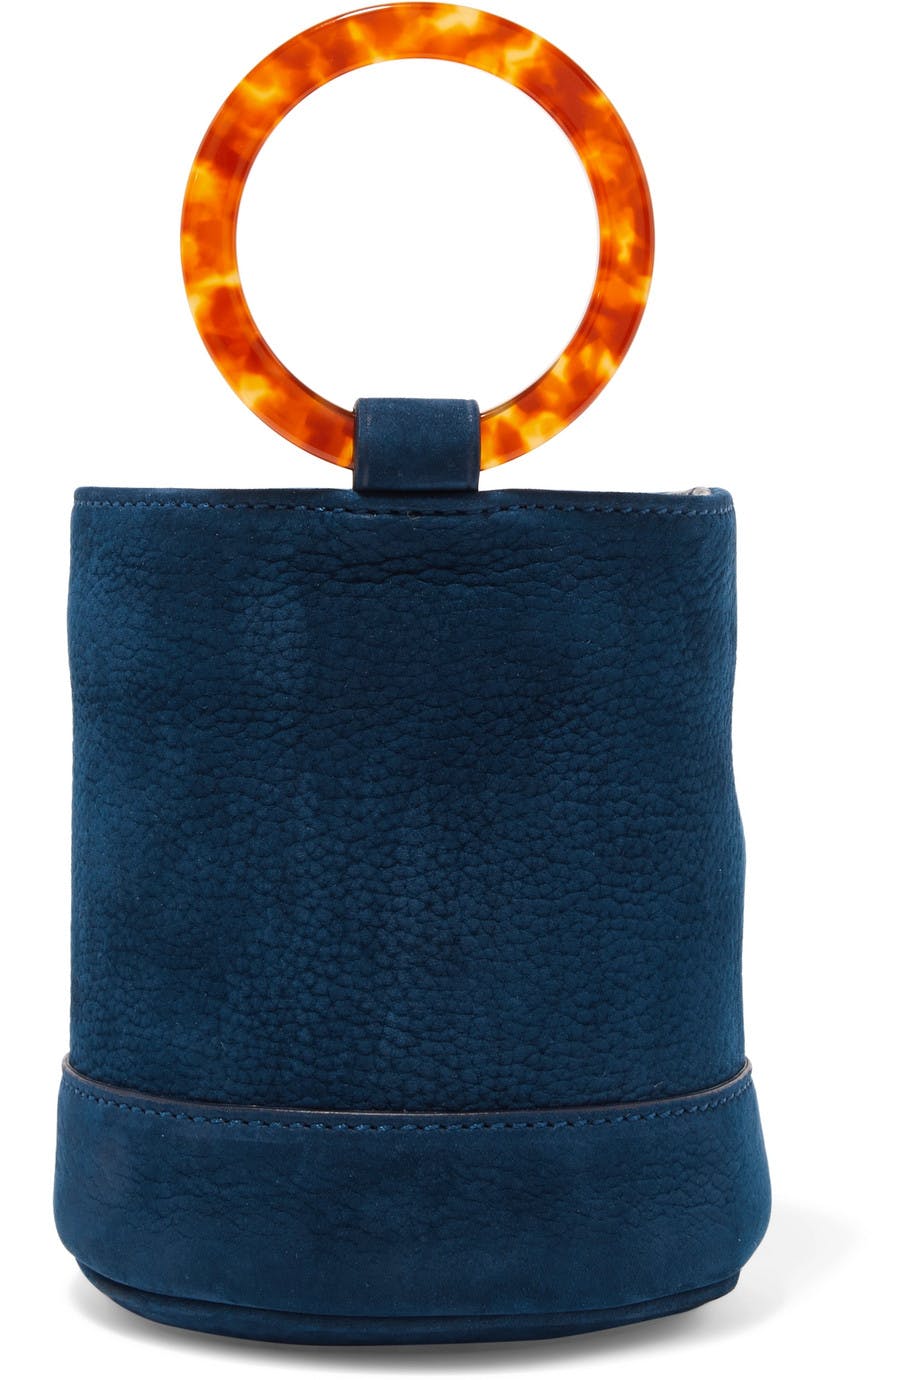 15 of the best bucket bags to shop right now